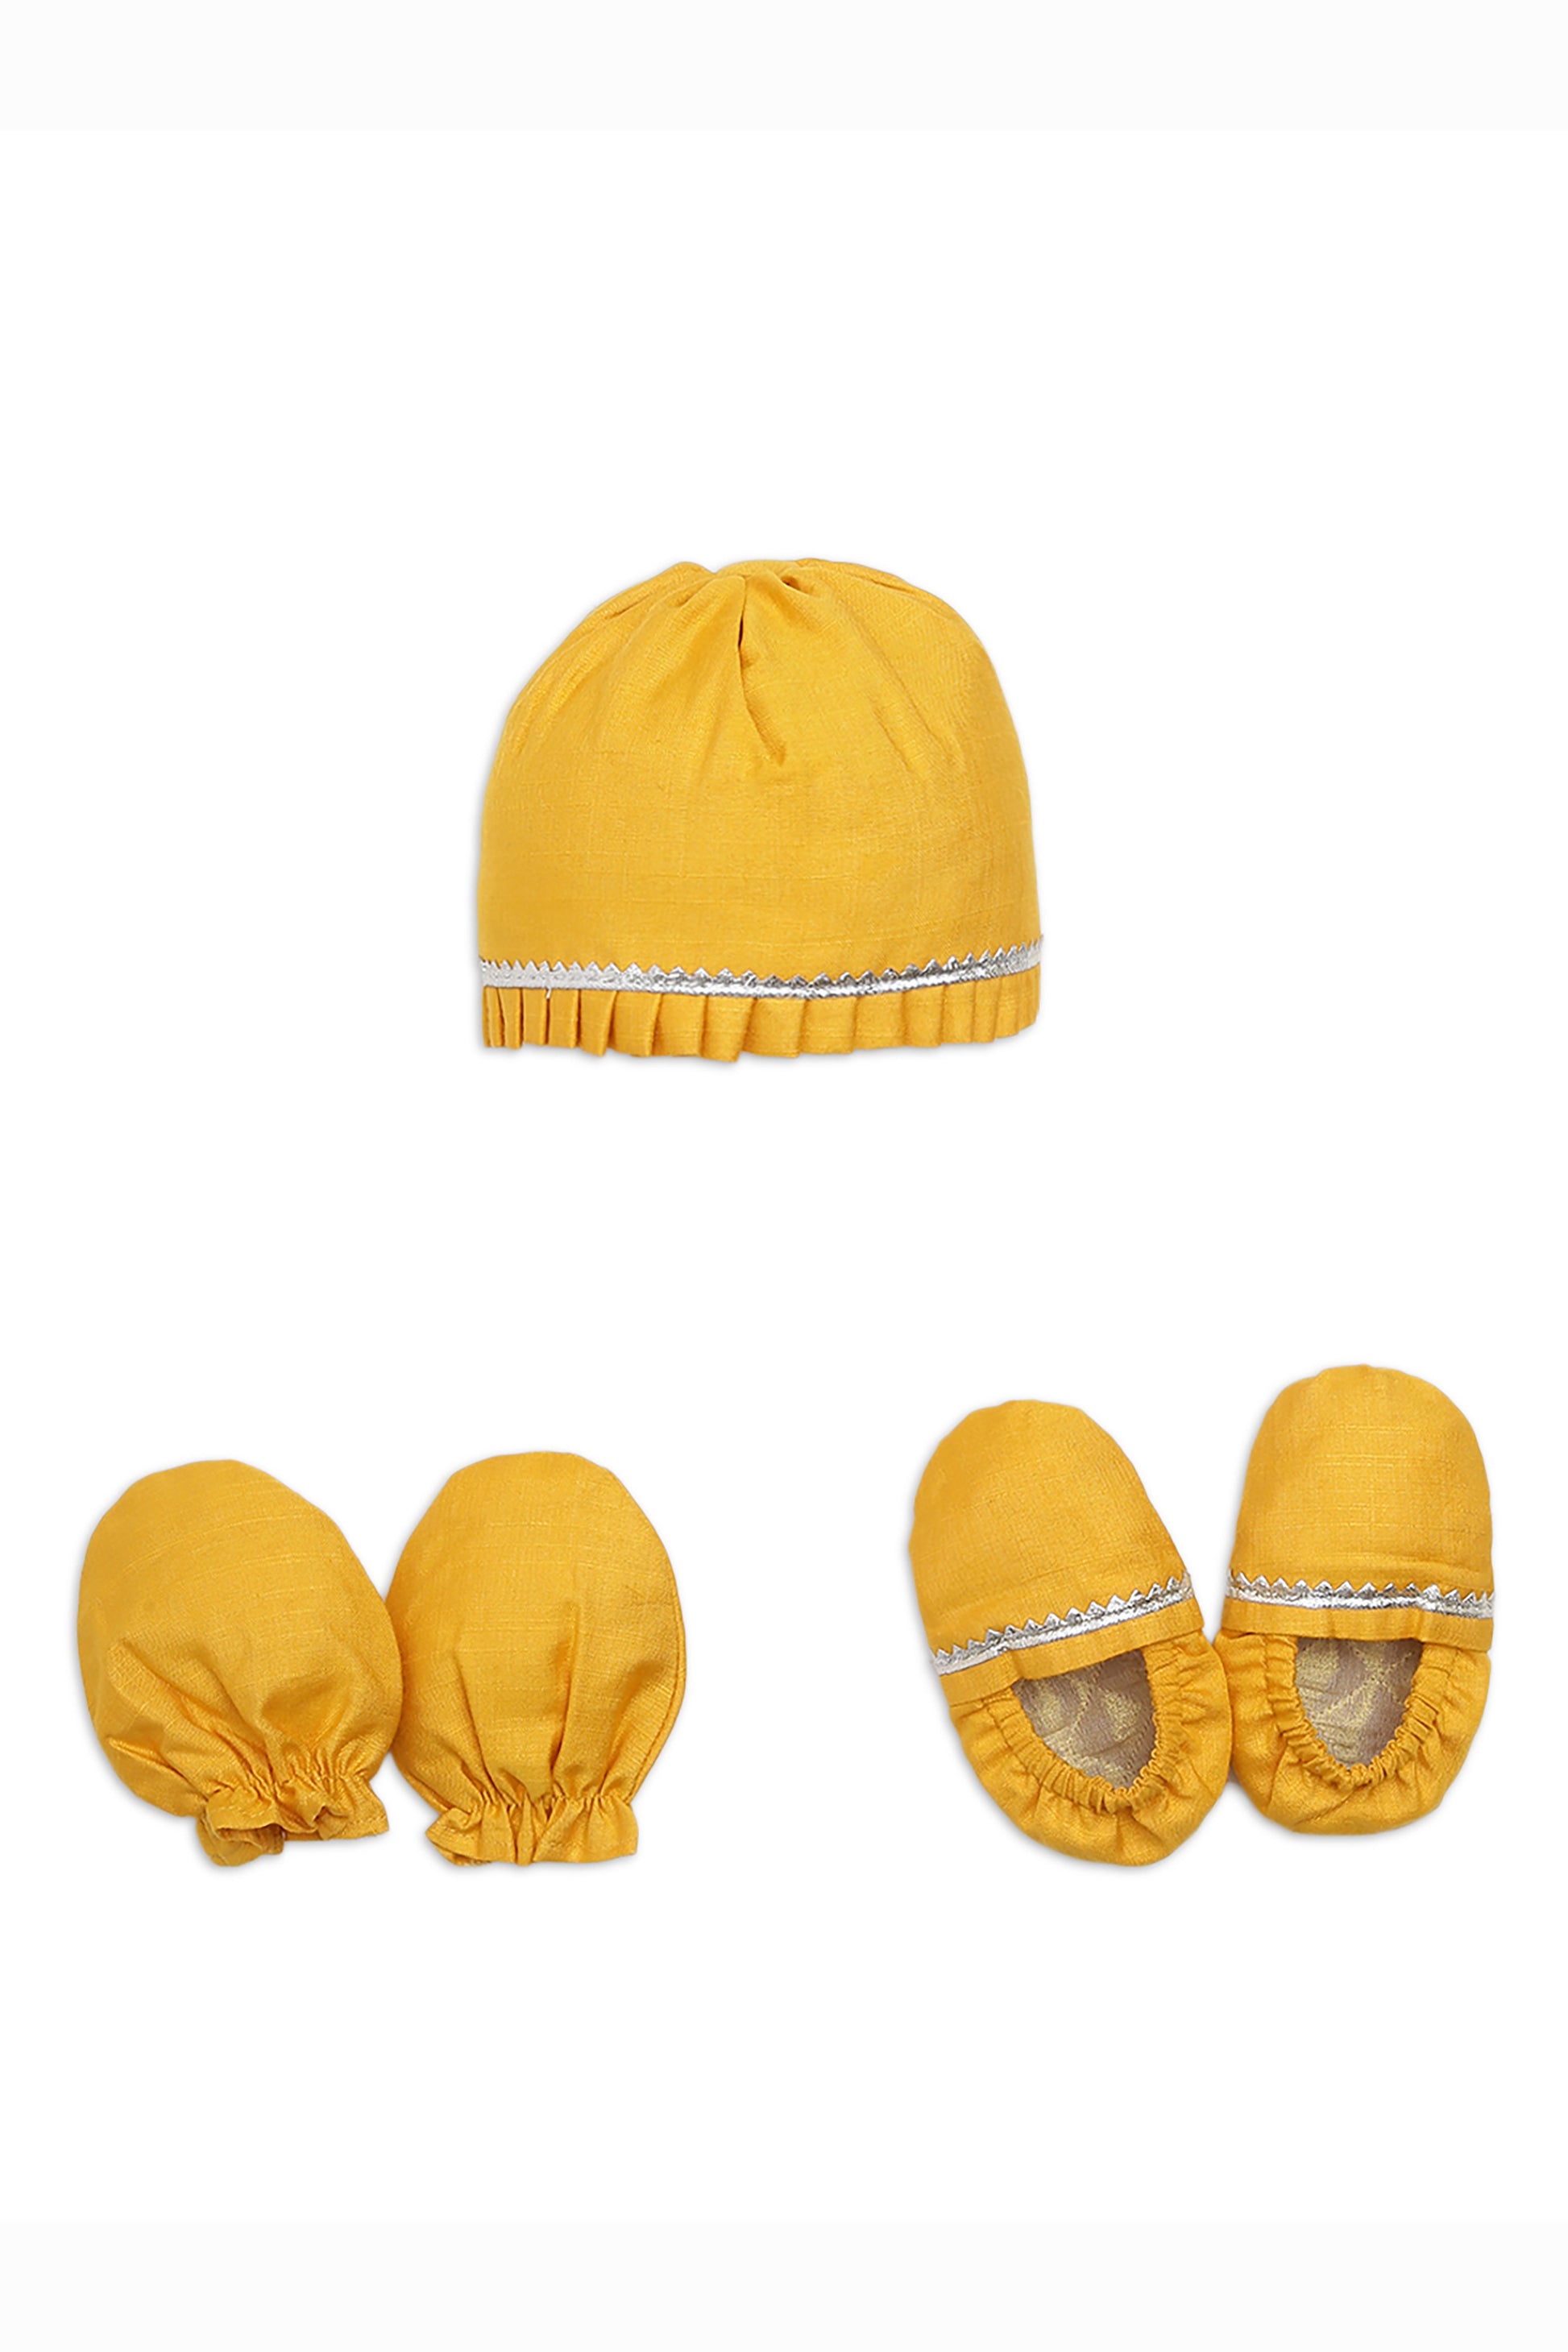 Baby Silk Yellow Booties Mittens And Cap Set by Tiber Taber Kids